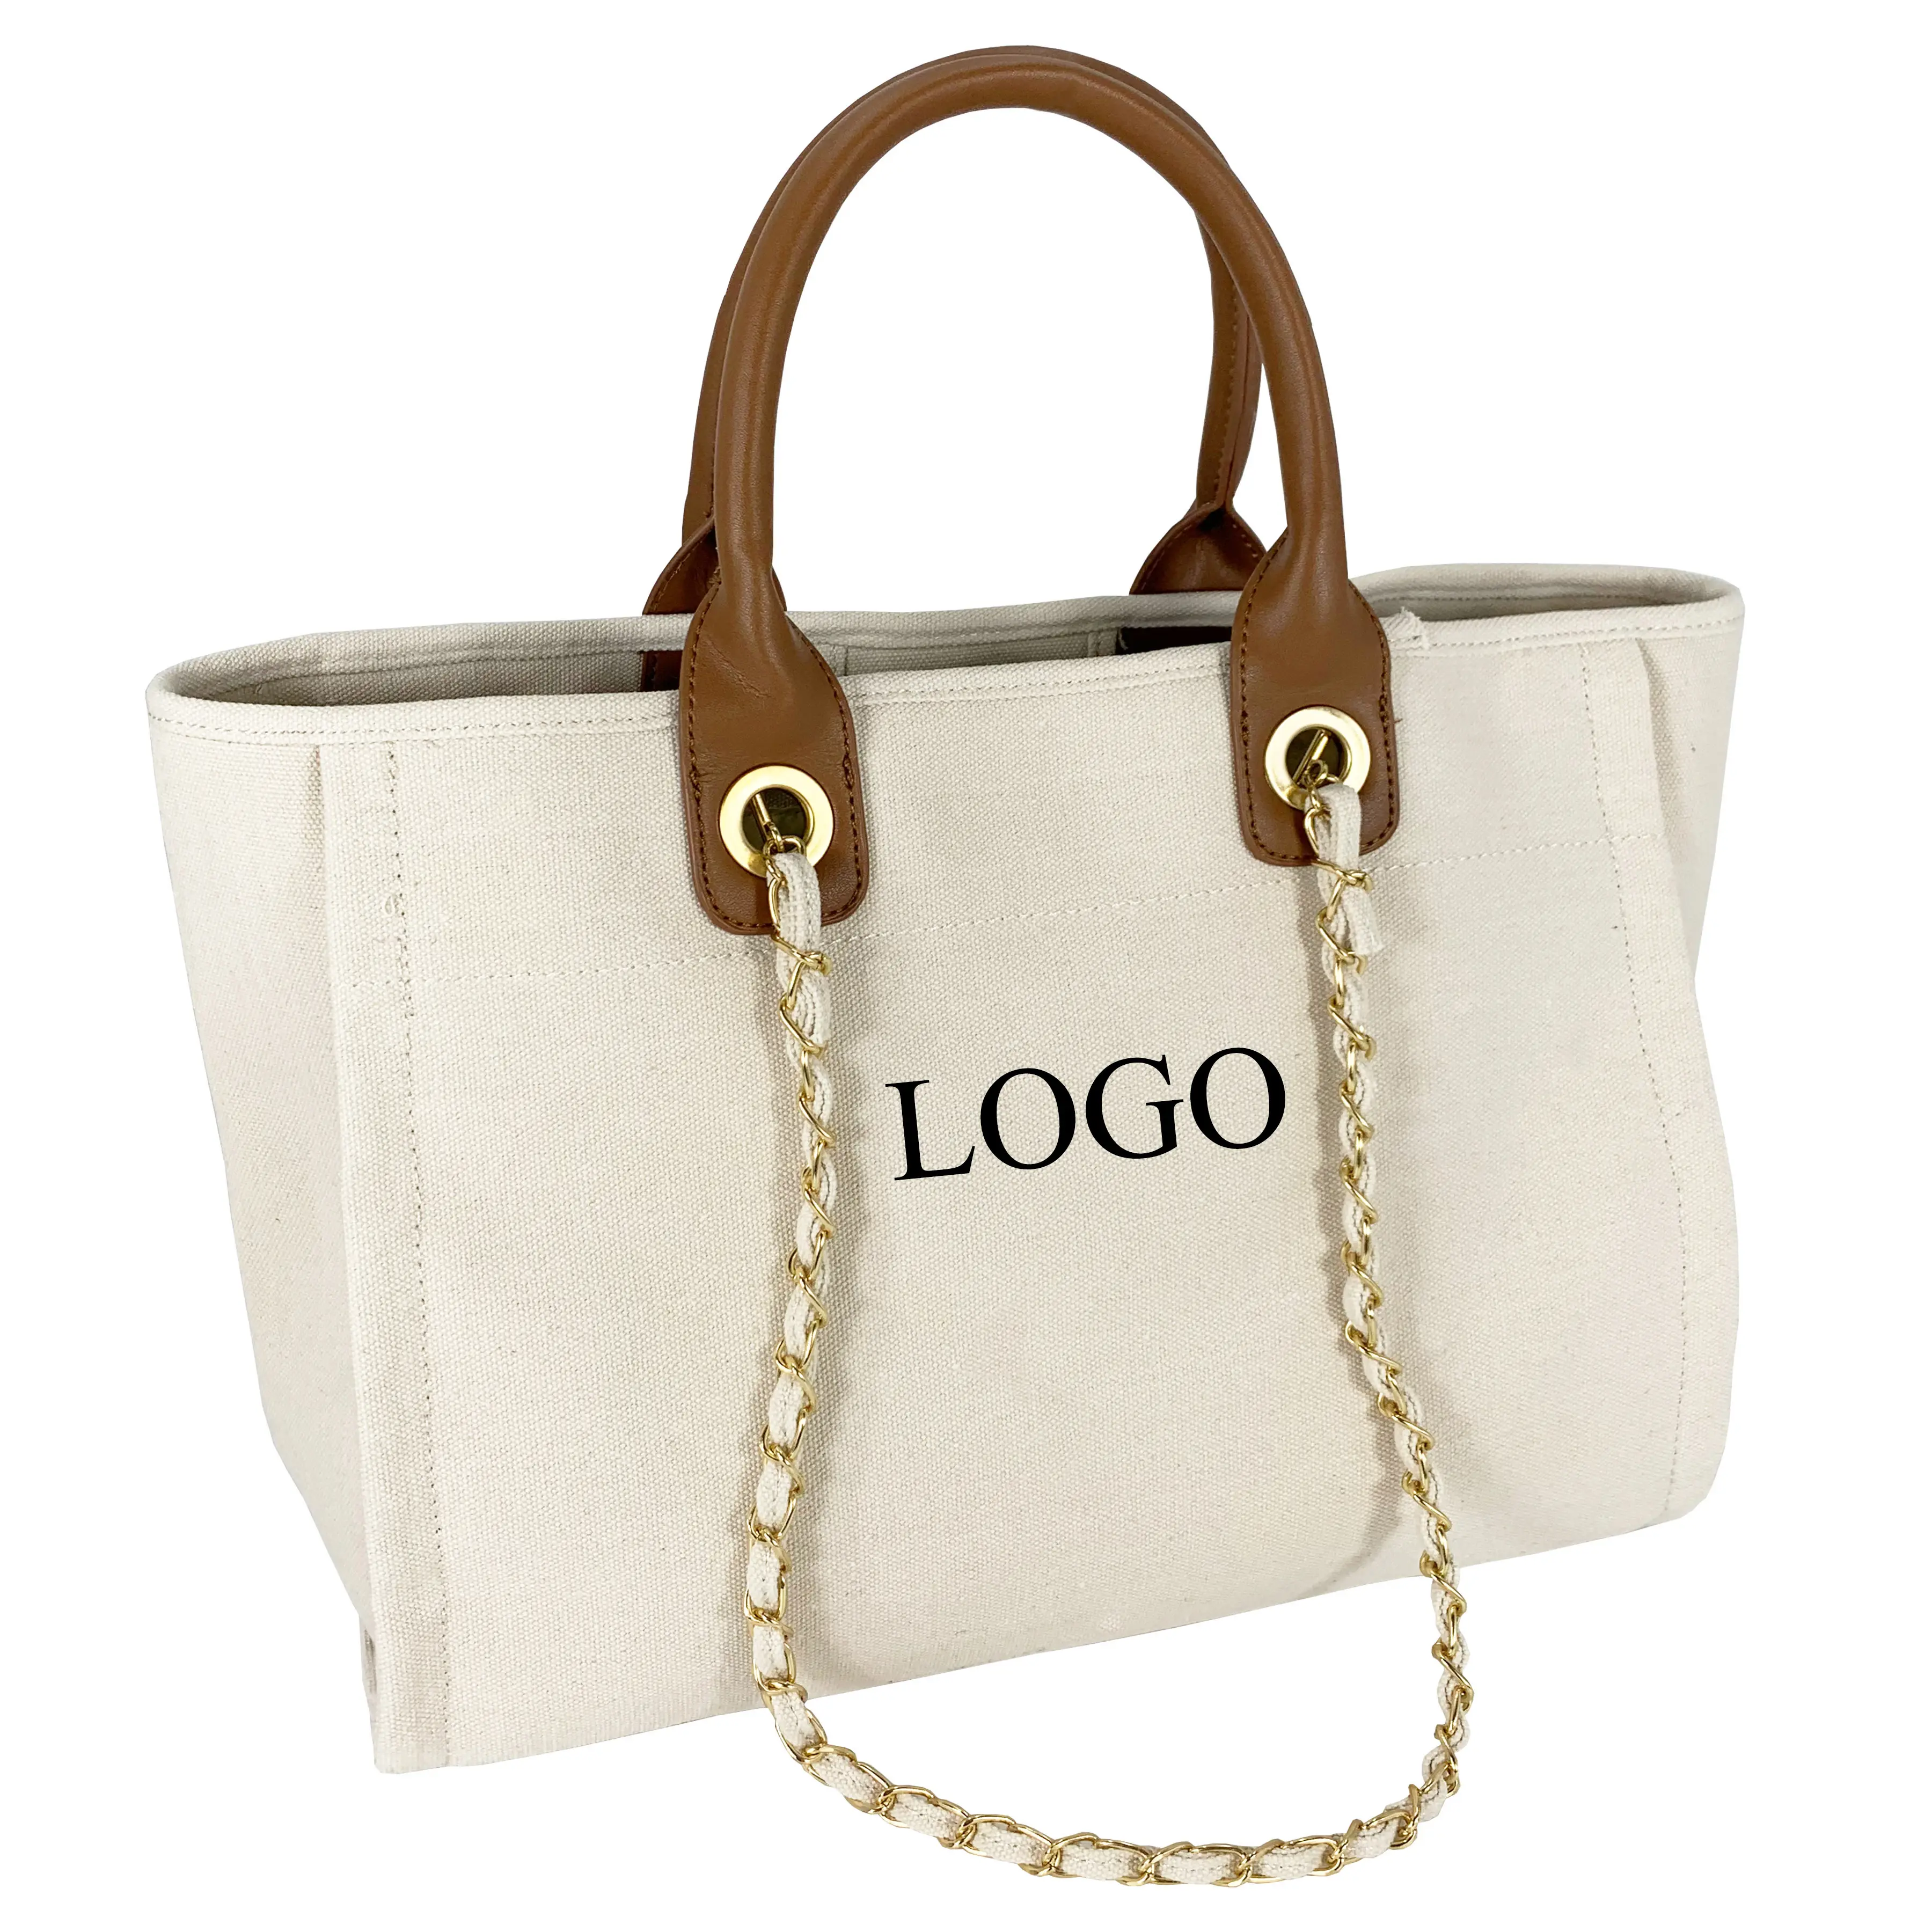 Luxury ladies leather handle famous design handbags durable heavy cotton tote bag pearl beading canvas shopping bags beach bags